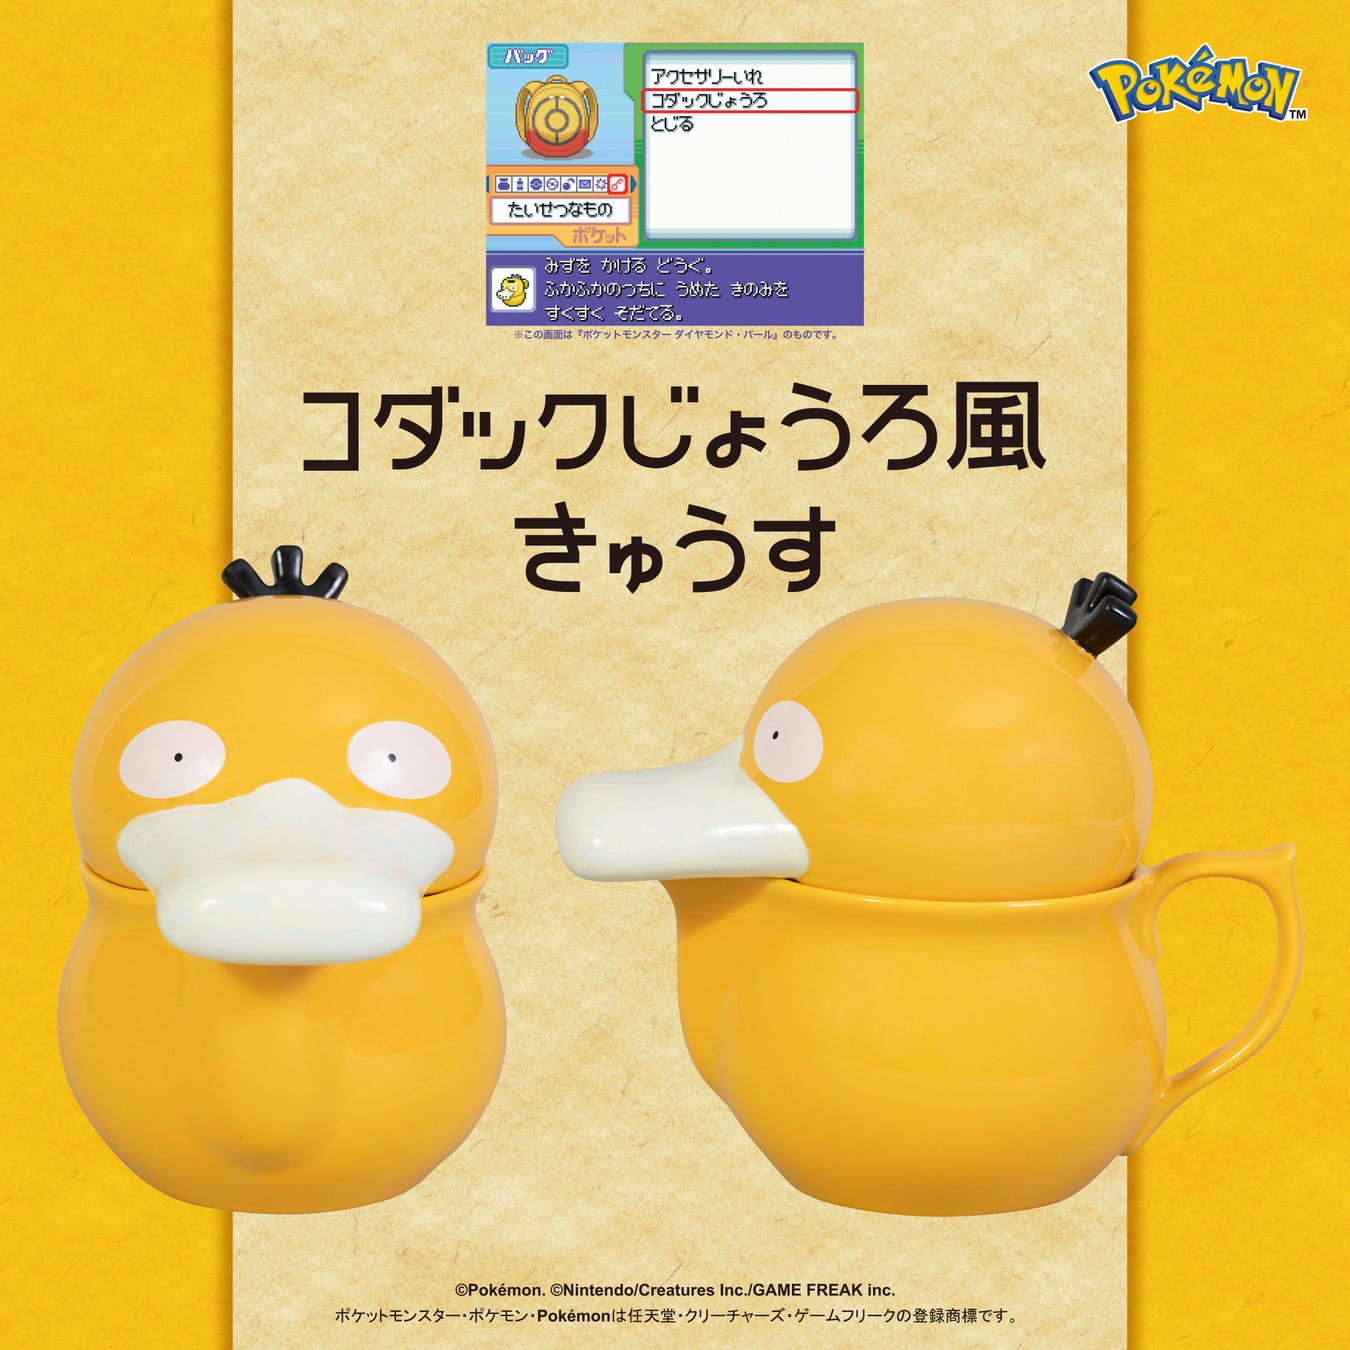 Psyduck teapot produced by Japanese craftspeople is here to serve up a headache-soothing cuppa